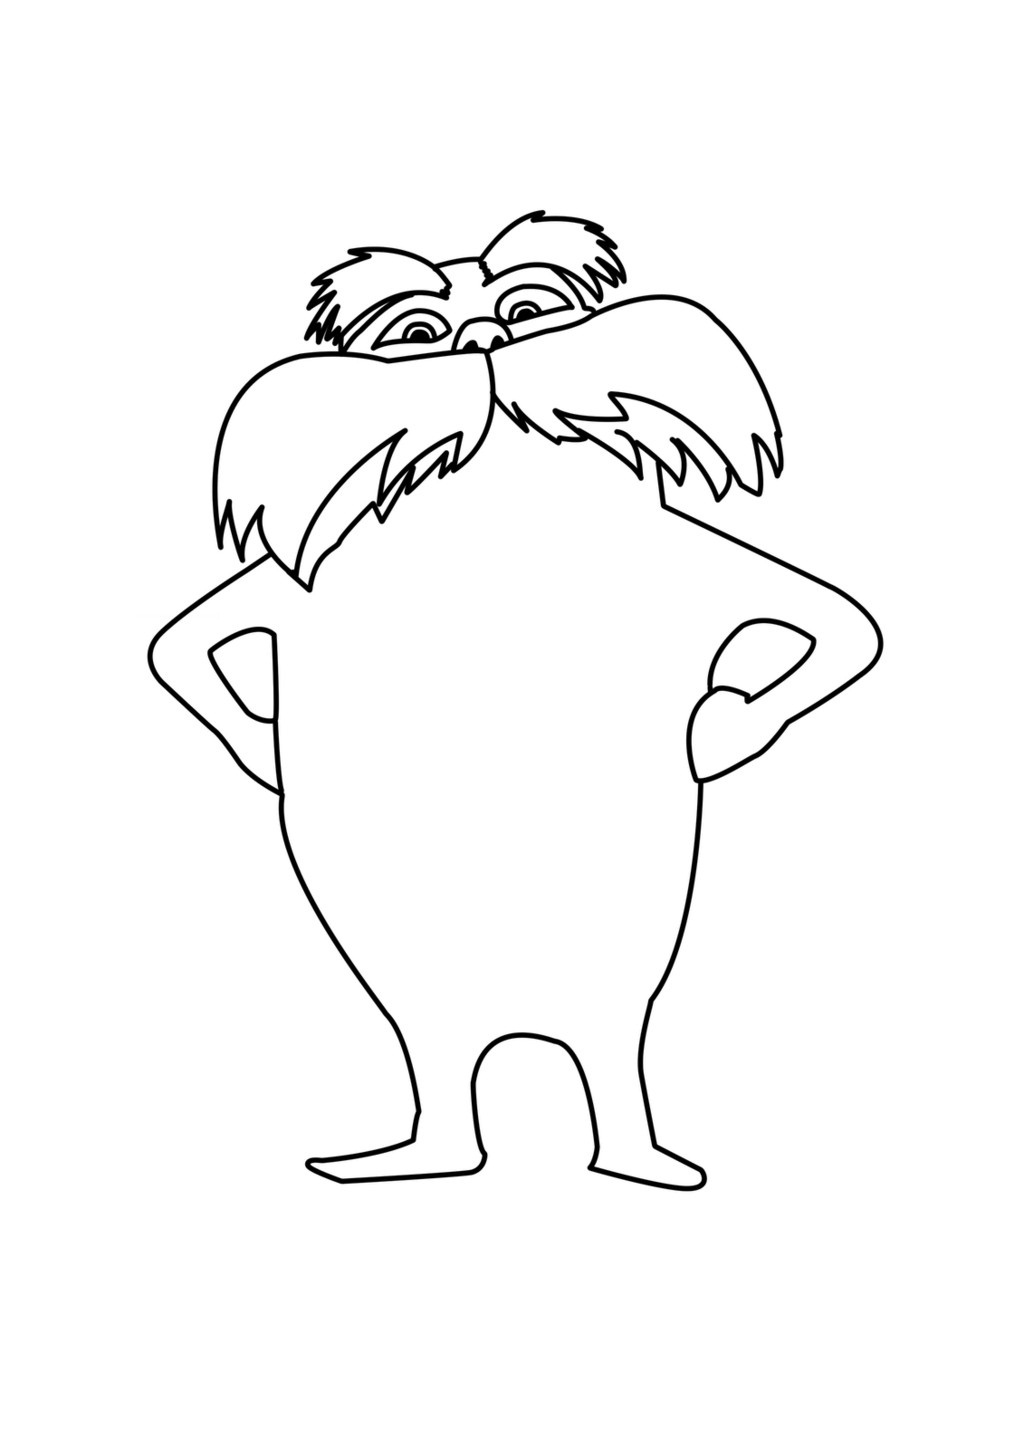 lorax-coloring-page-sketch-coloring-page